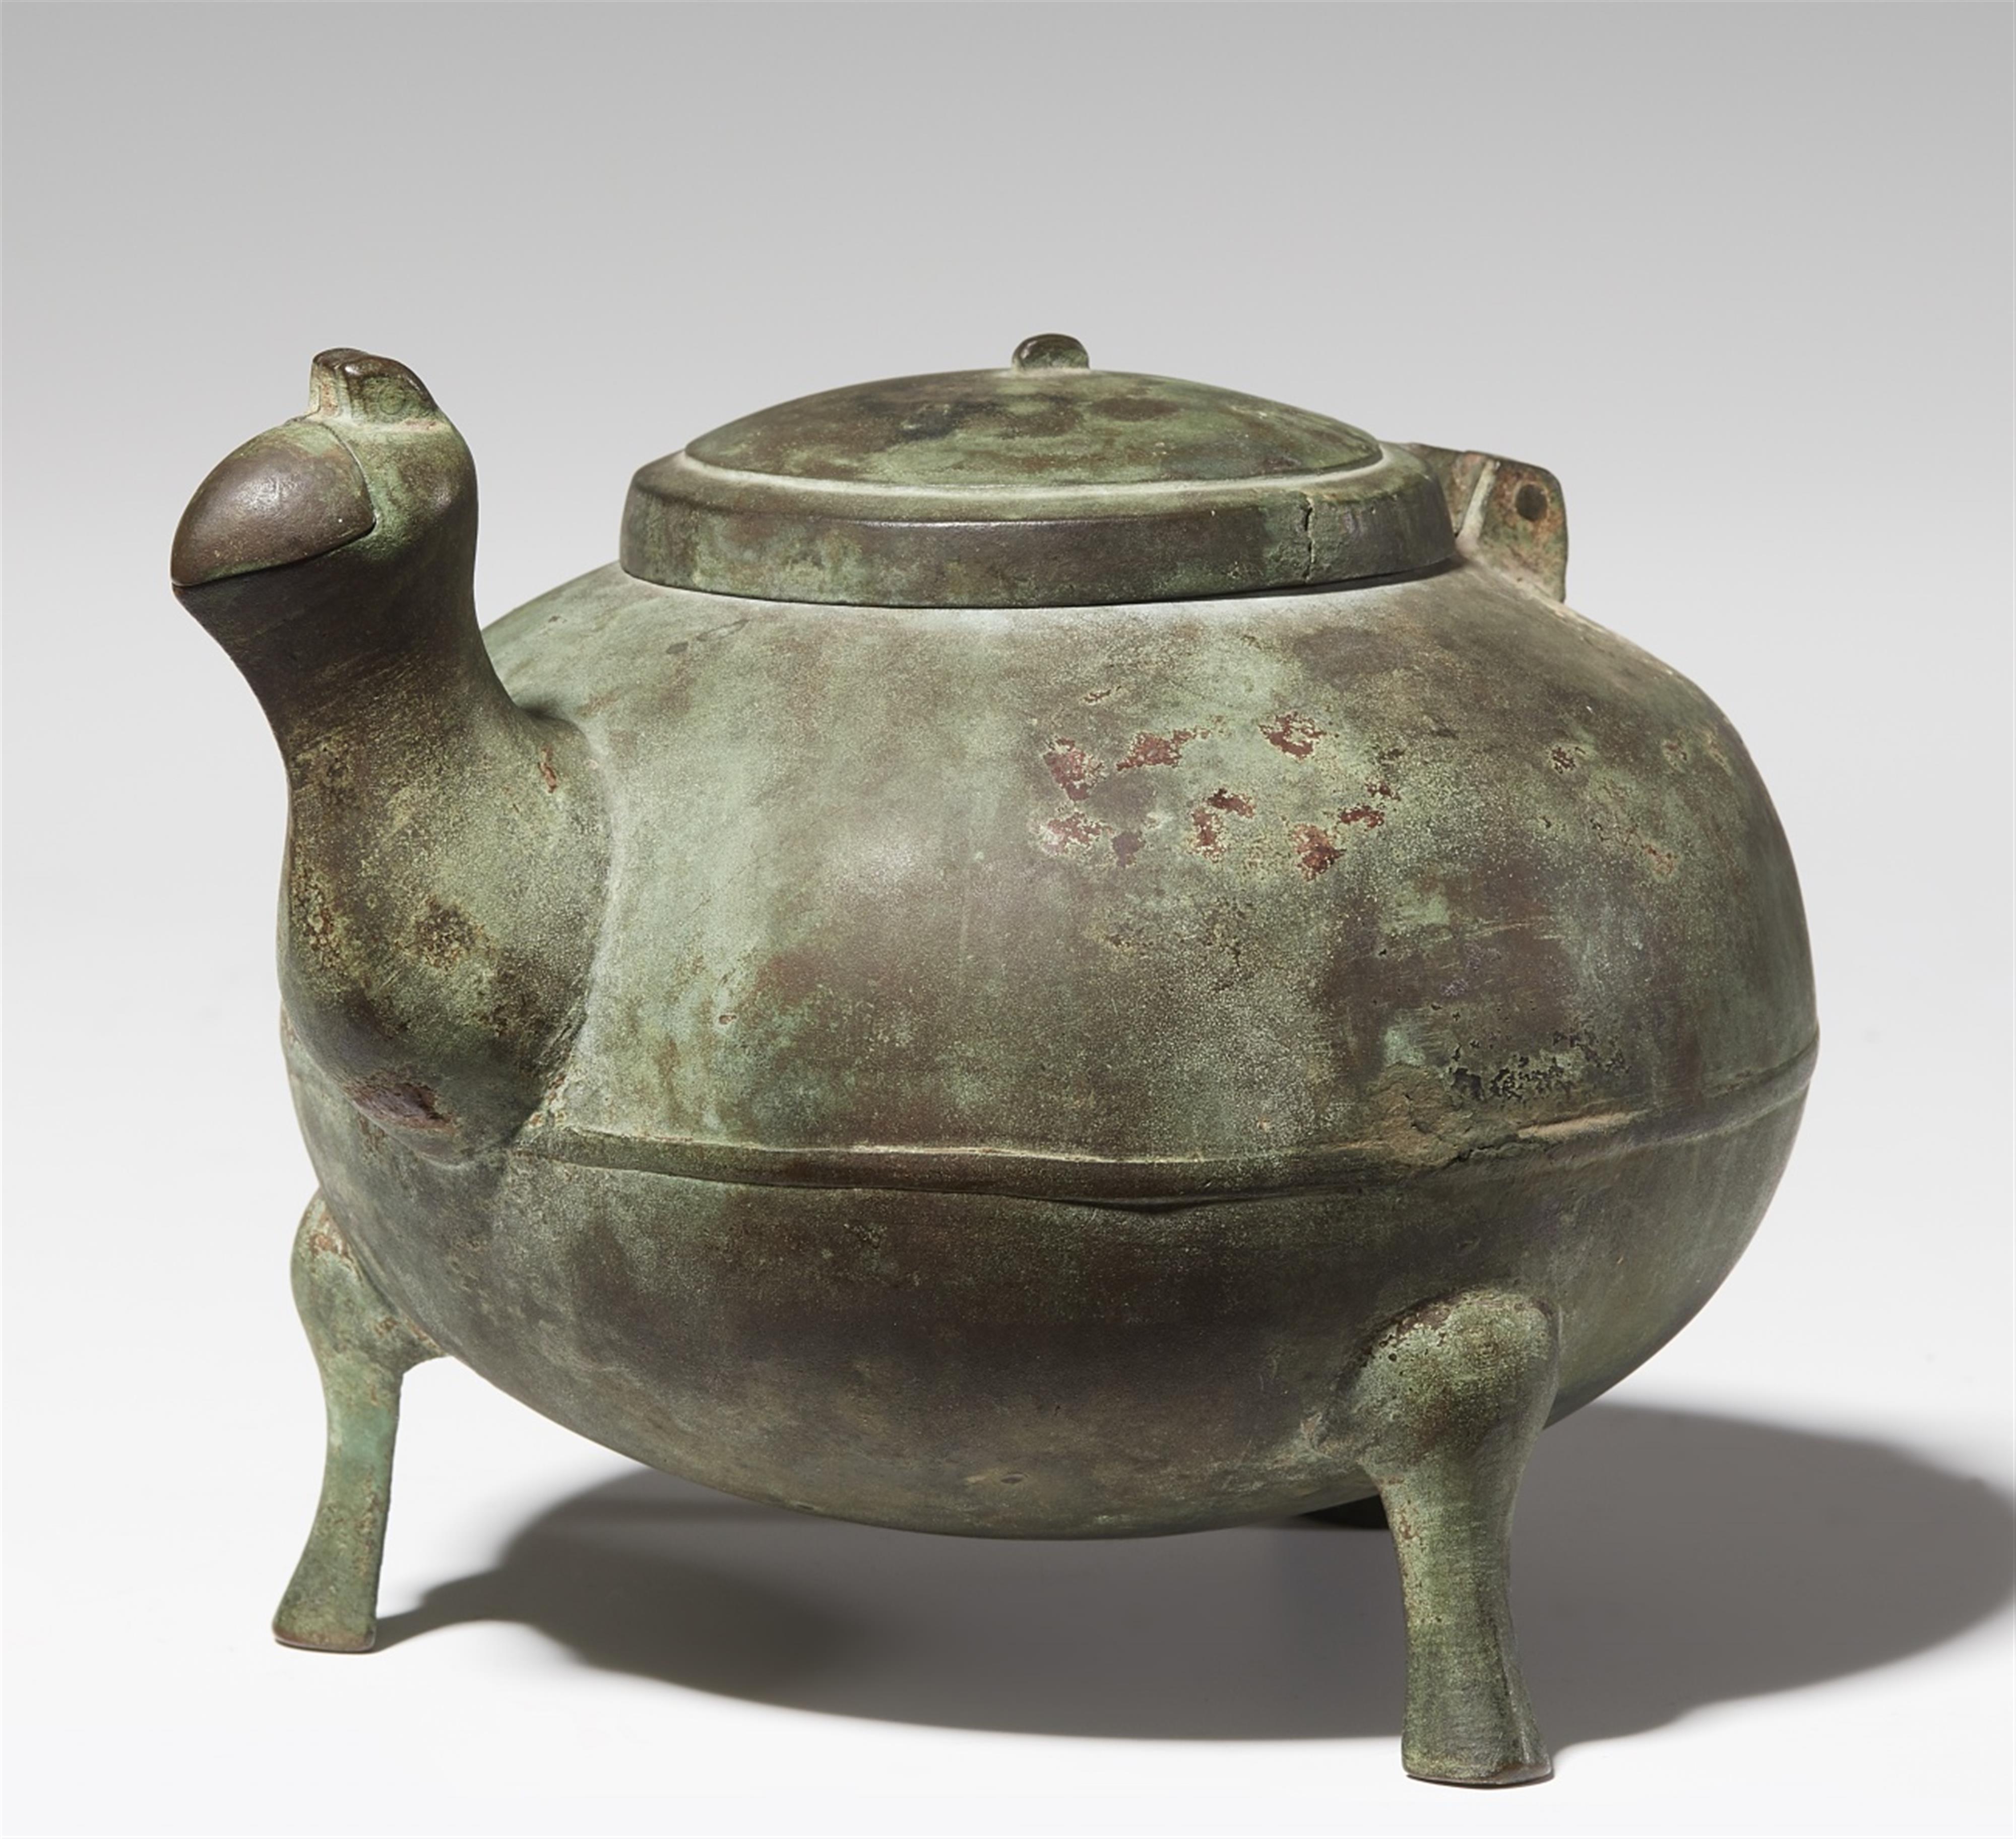 A bronze pouring vessel for wine (jiadou). Bronze. Early Western Han dynasty, 2nd century BC. - image-1